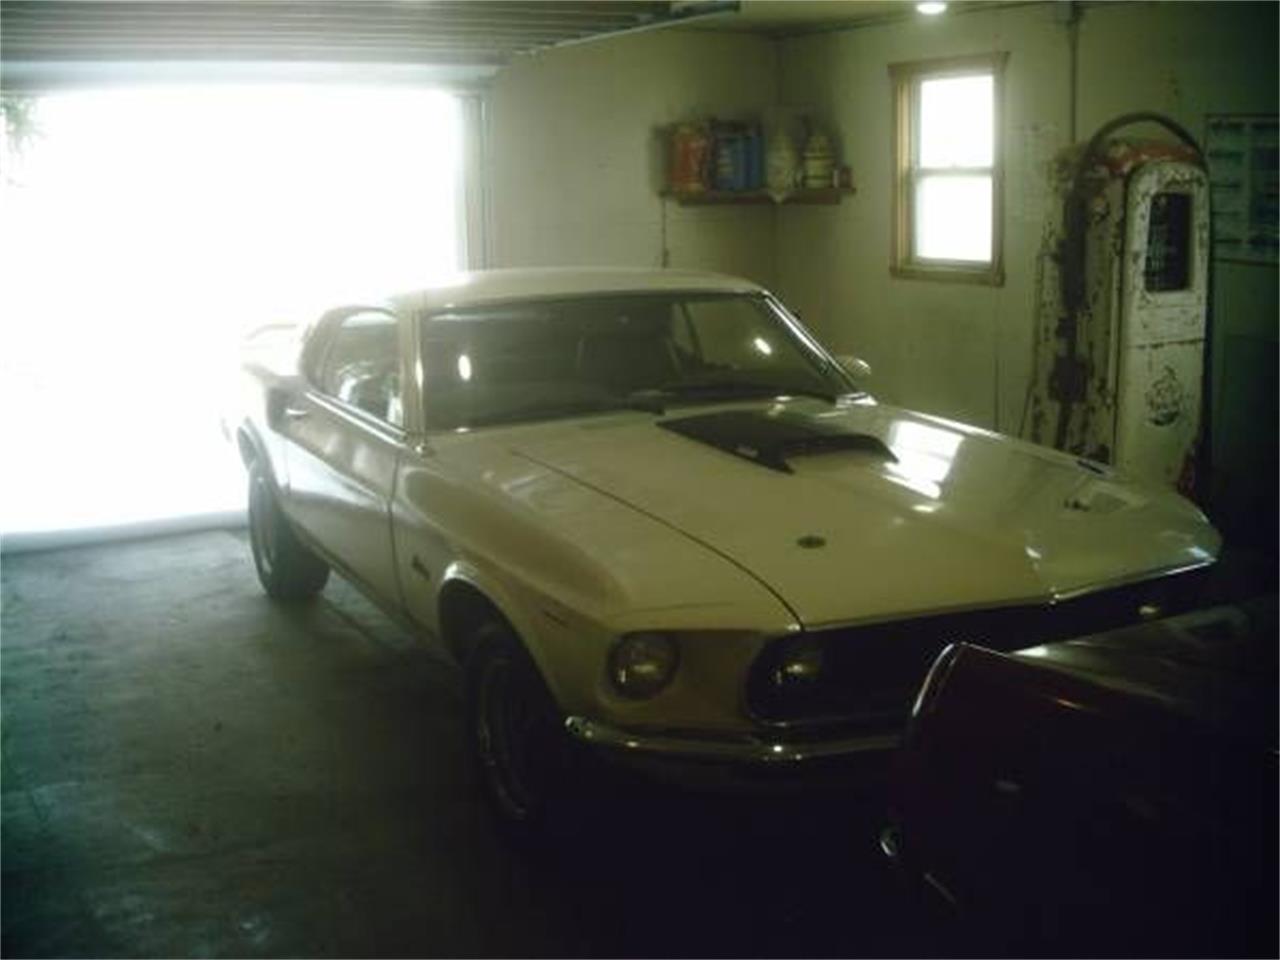 1969 Ford Mustang for sale in Cadillac, MI